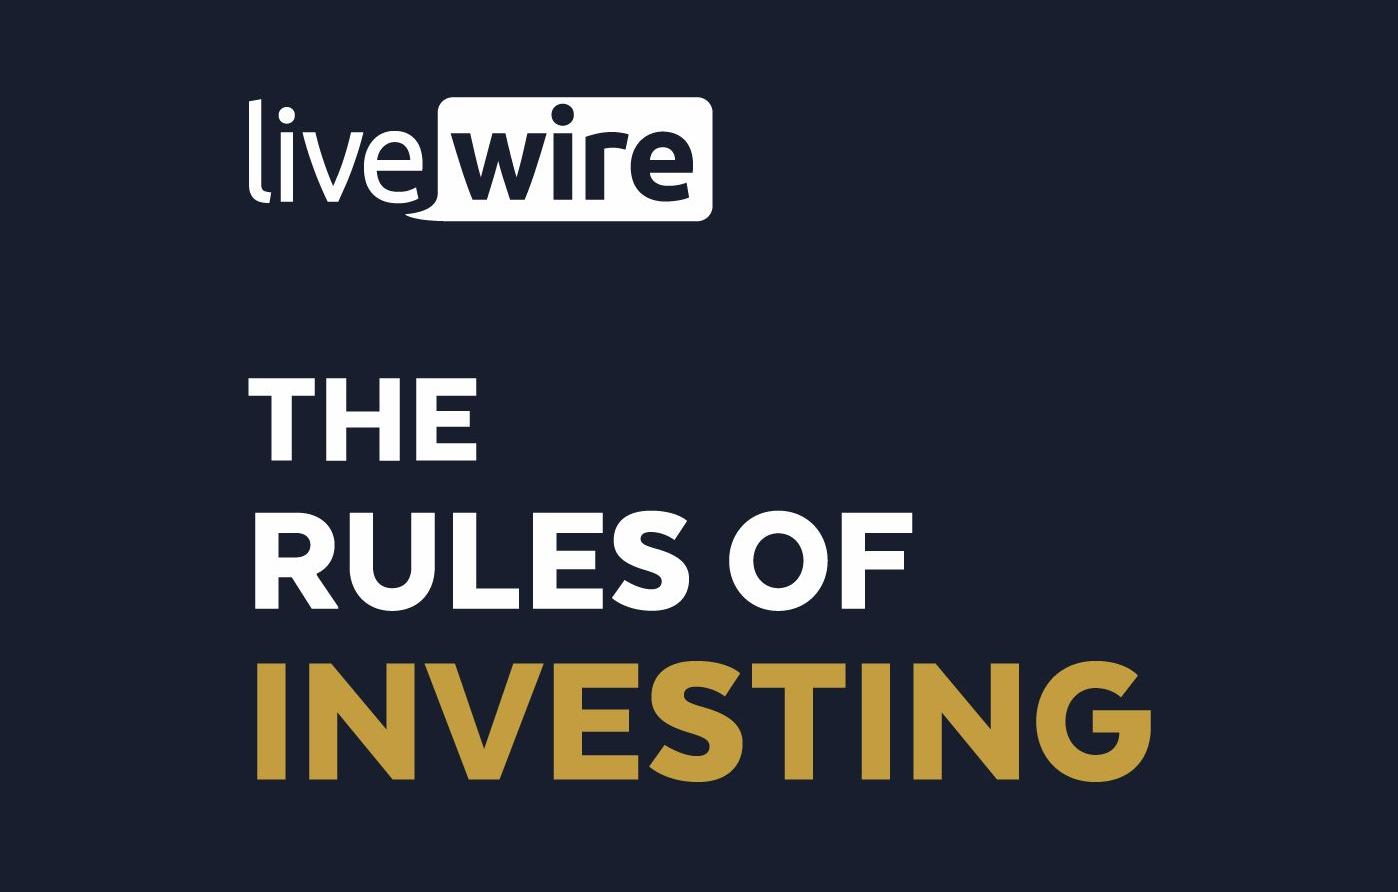 Livewire - The Rules of Investing